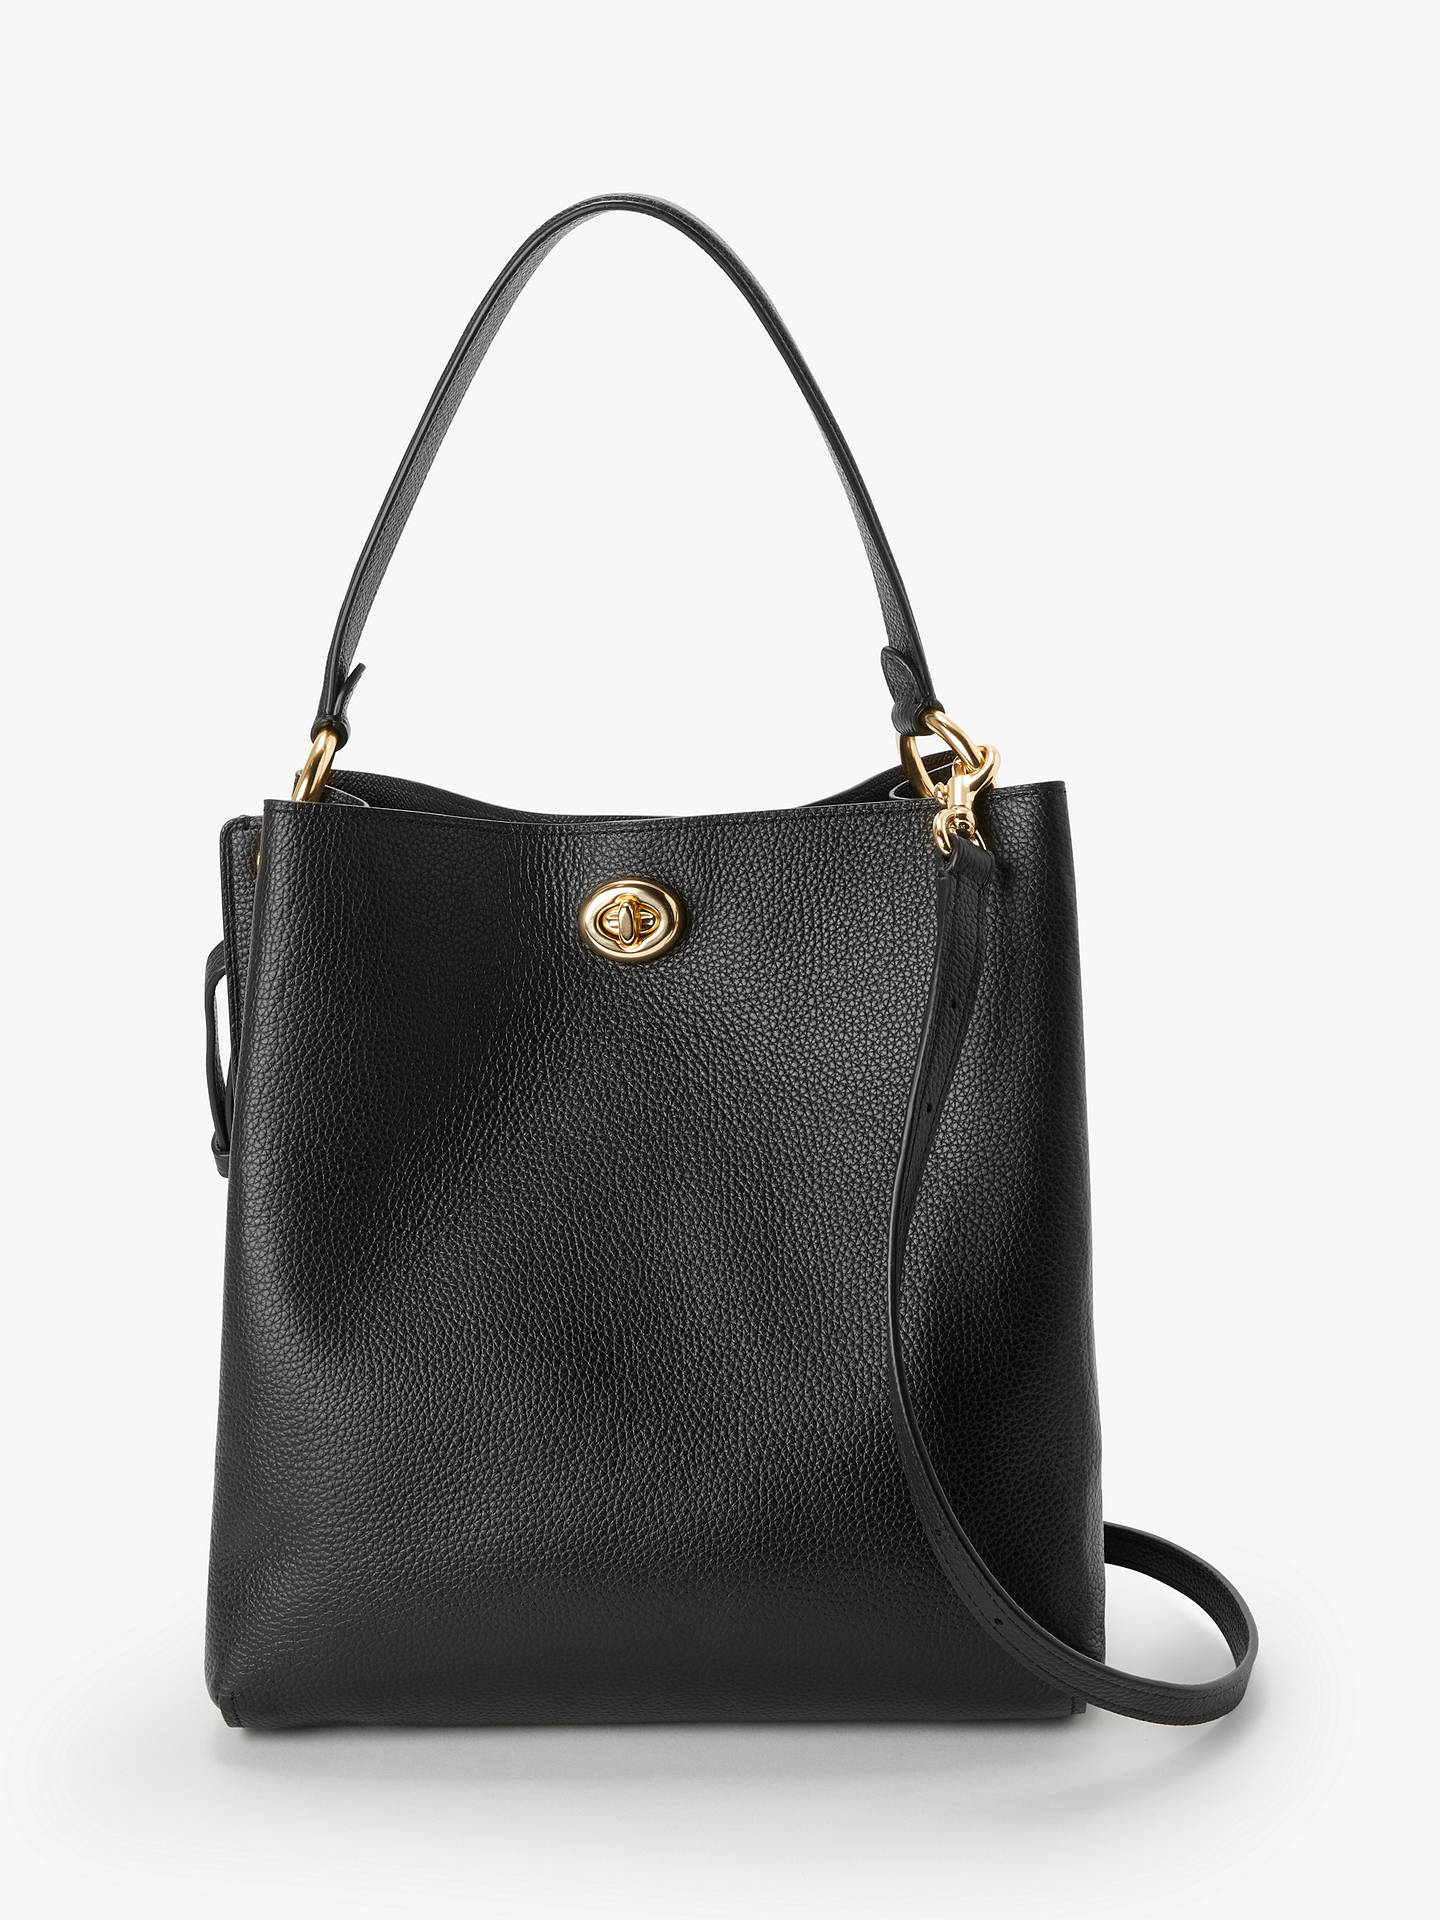 Coach Charlie Textured Leather Bucket Bag | IUCN Water